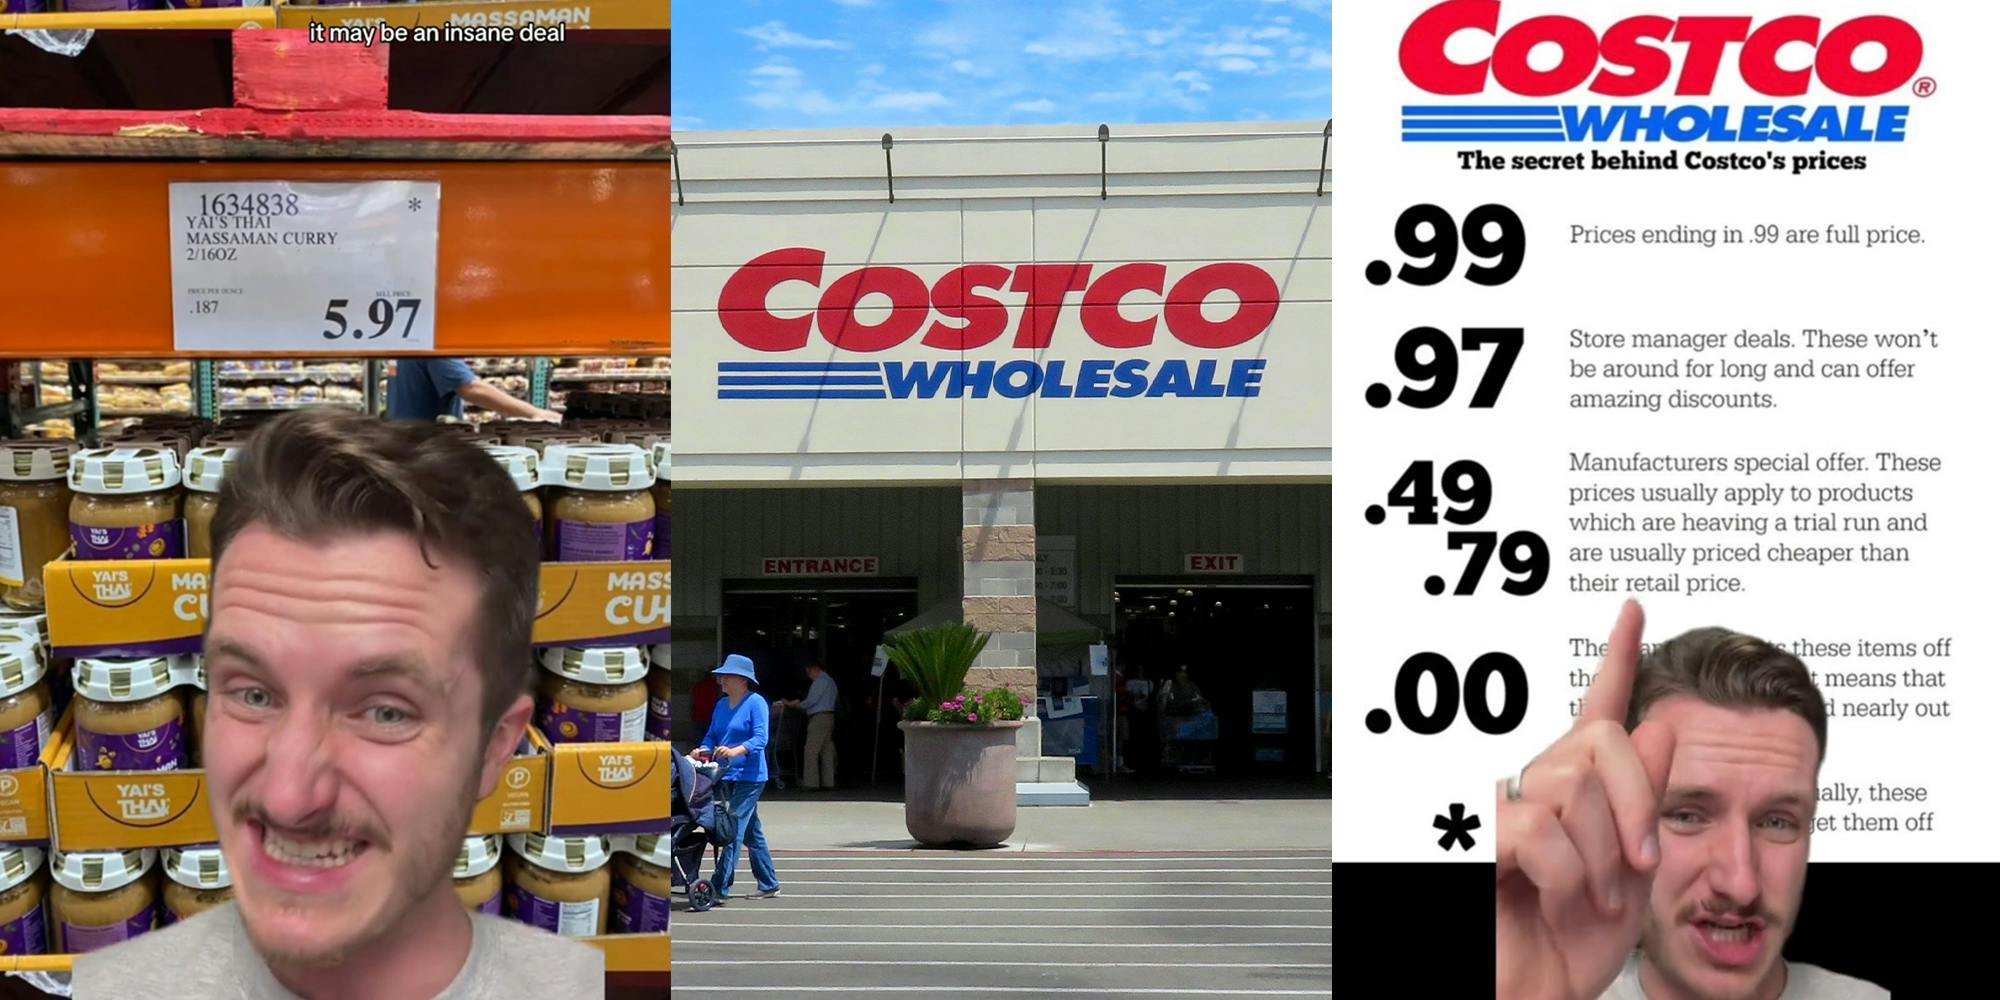 'I knew about the asterisk for years': Costco shopper shares the 'secret' behind Costco's price tags